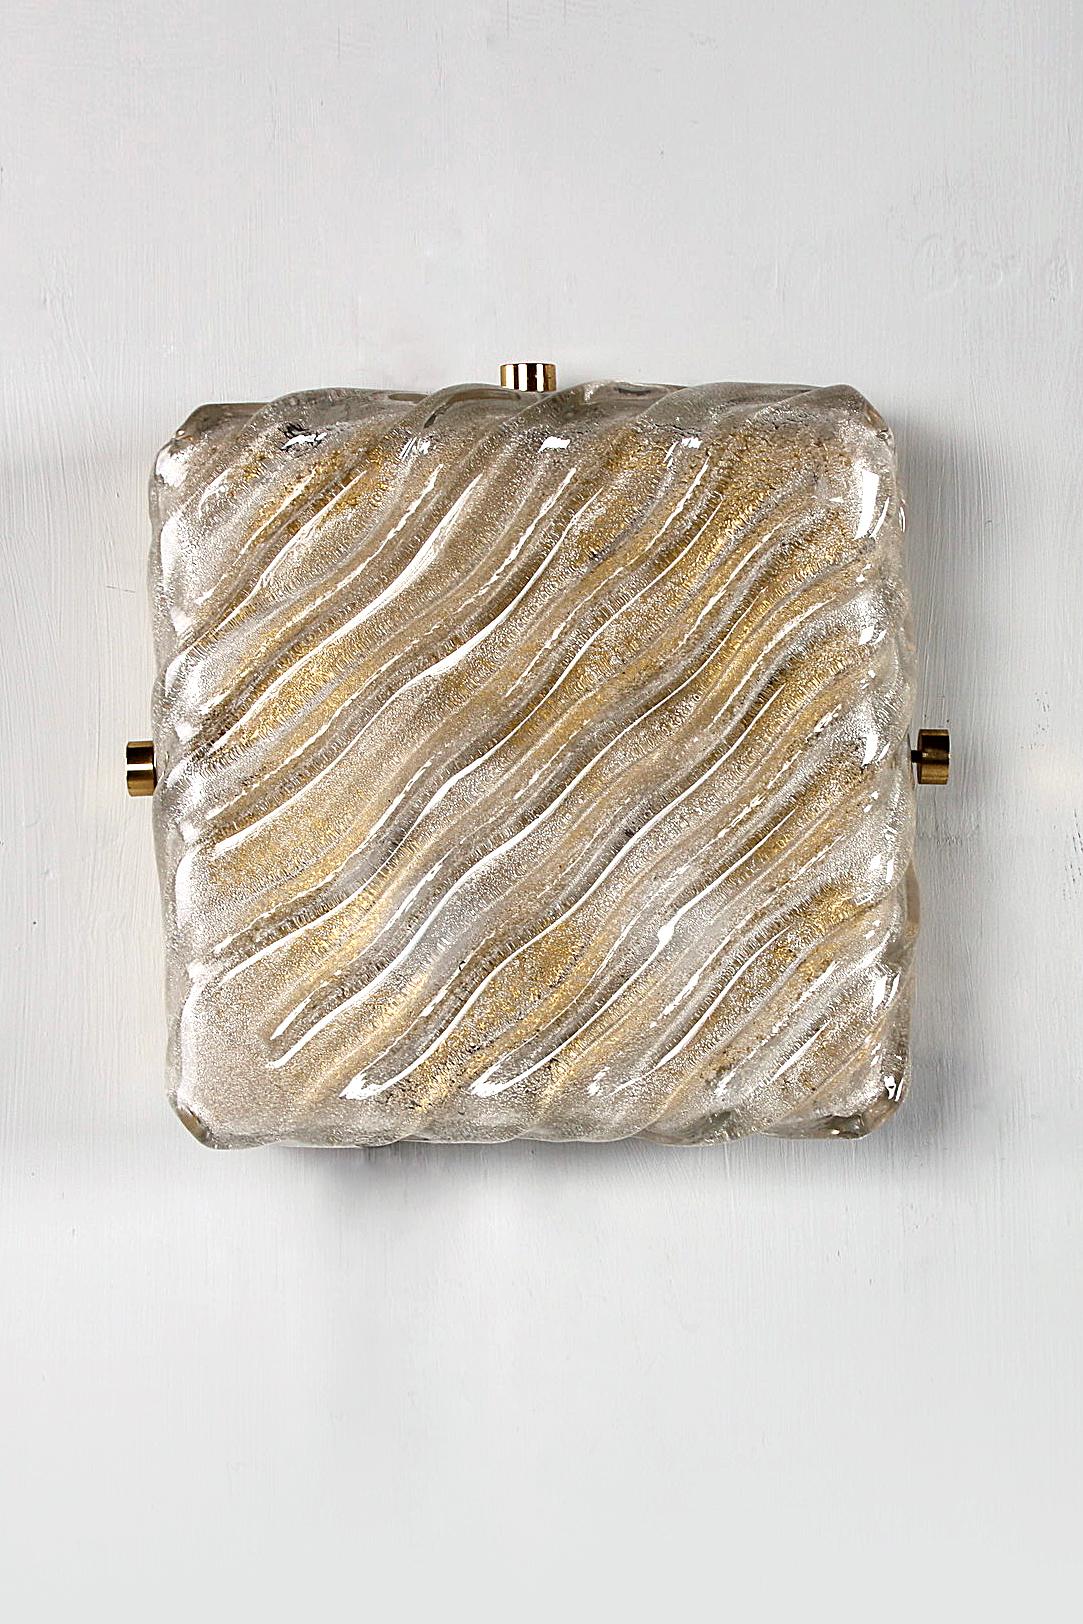 Kaiser Leuchten Vintage Ceiling or Wall Lamp, 1960s In Excellent Condition For Sale In Oostrum-Venray, NL